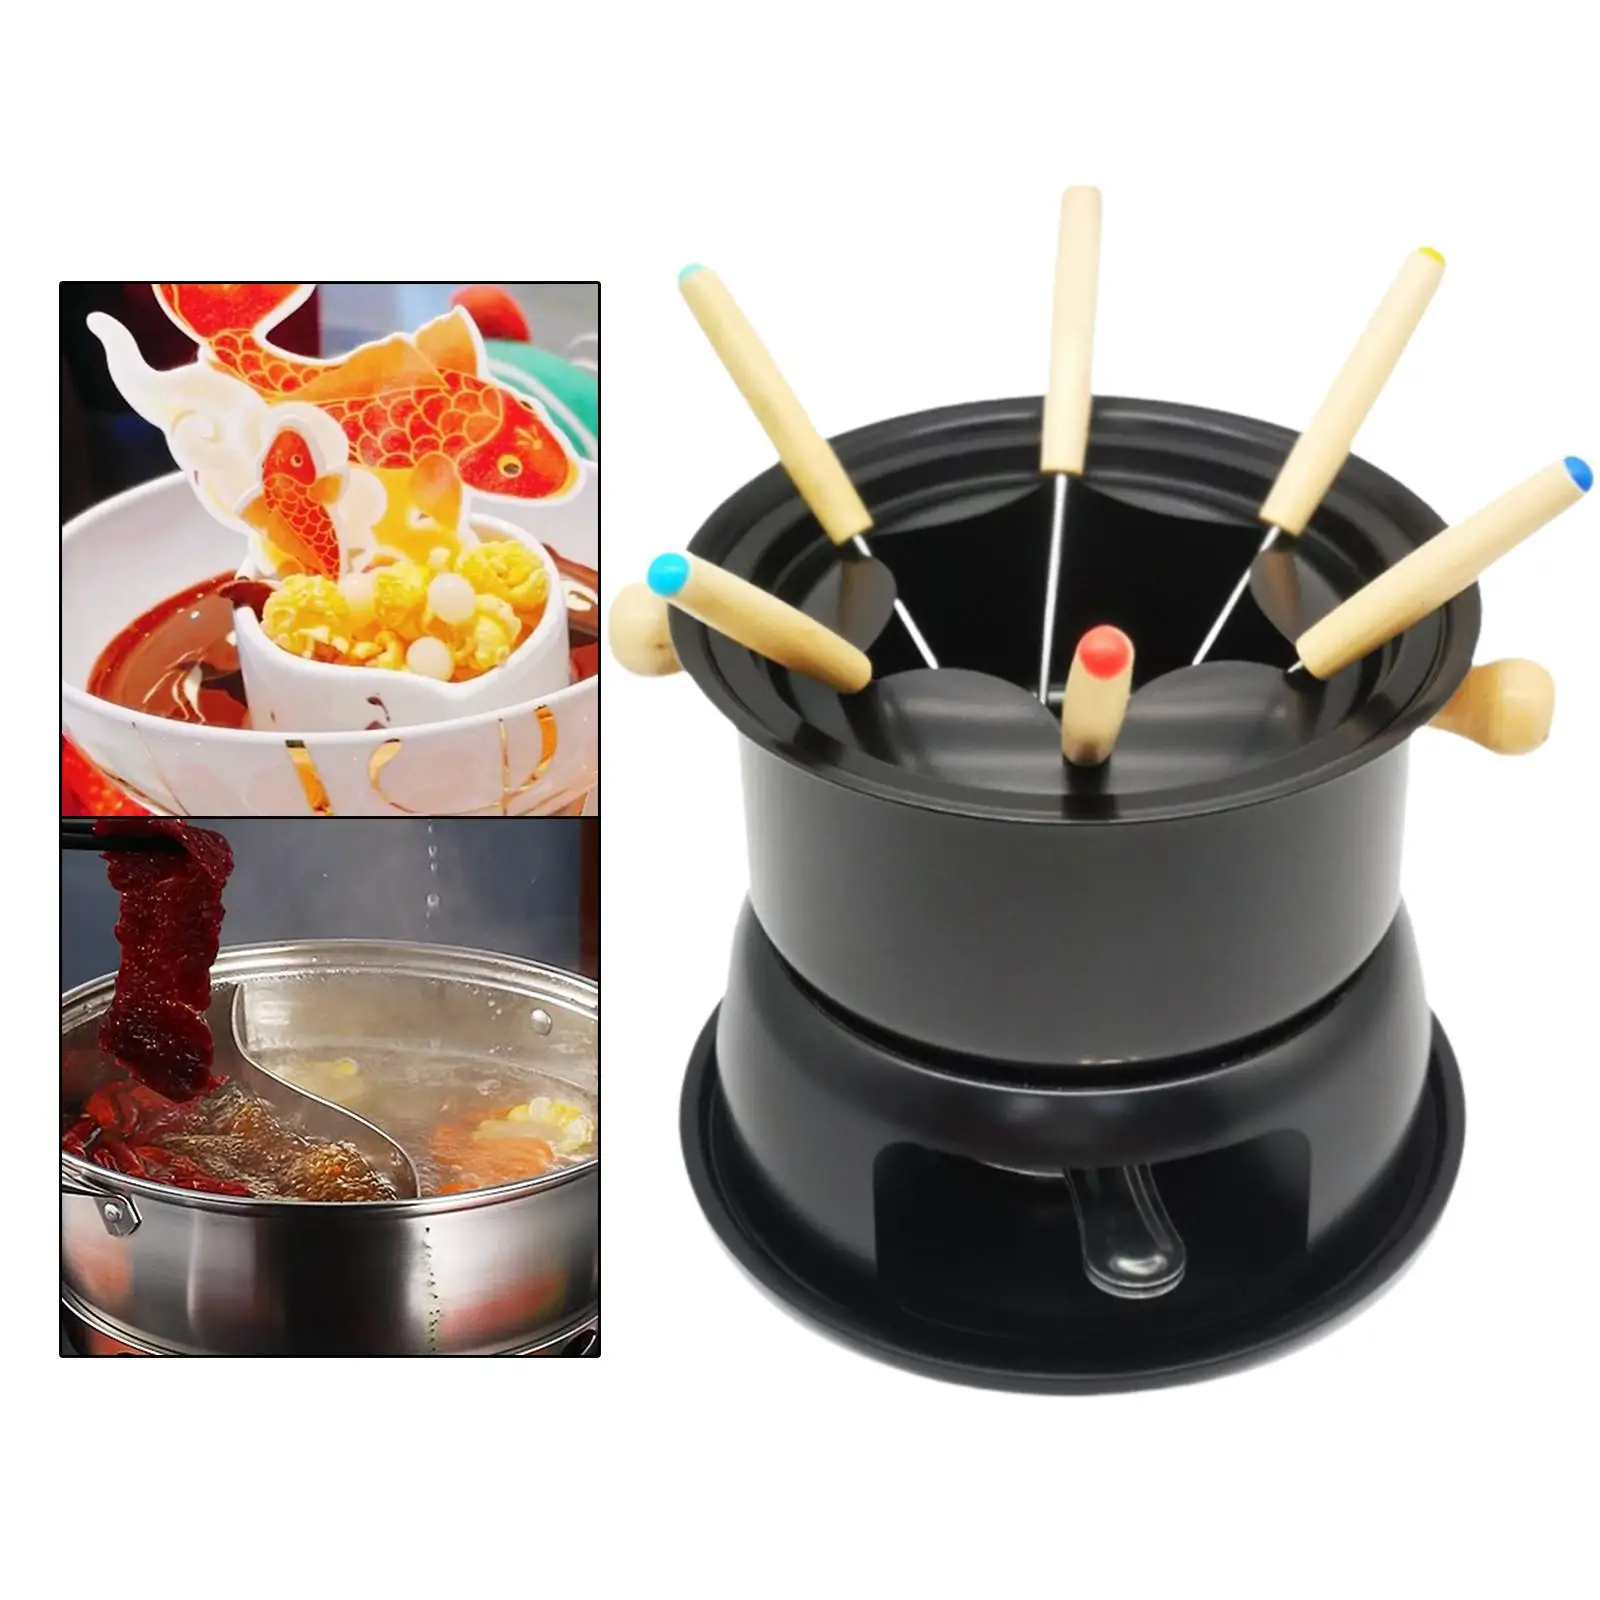 Detachable Fondue Maker Set with 6 Forks Domestic Carbon Steel Melting Pot Hot Pot for Chocolate Sauces Caramel Cheese Ice Cream